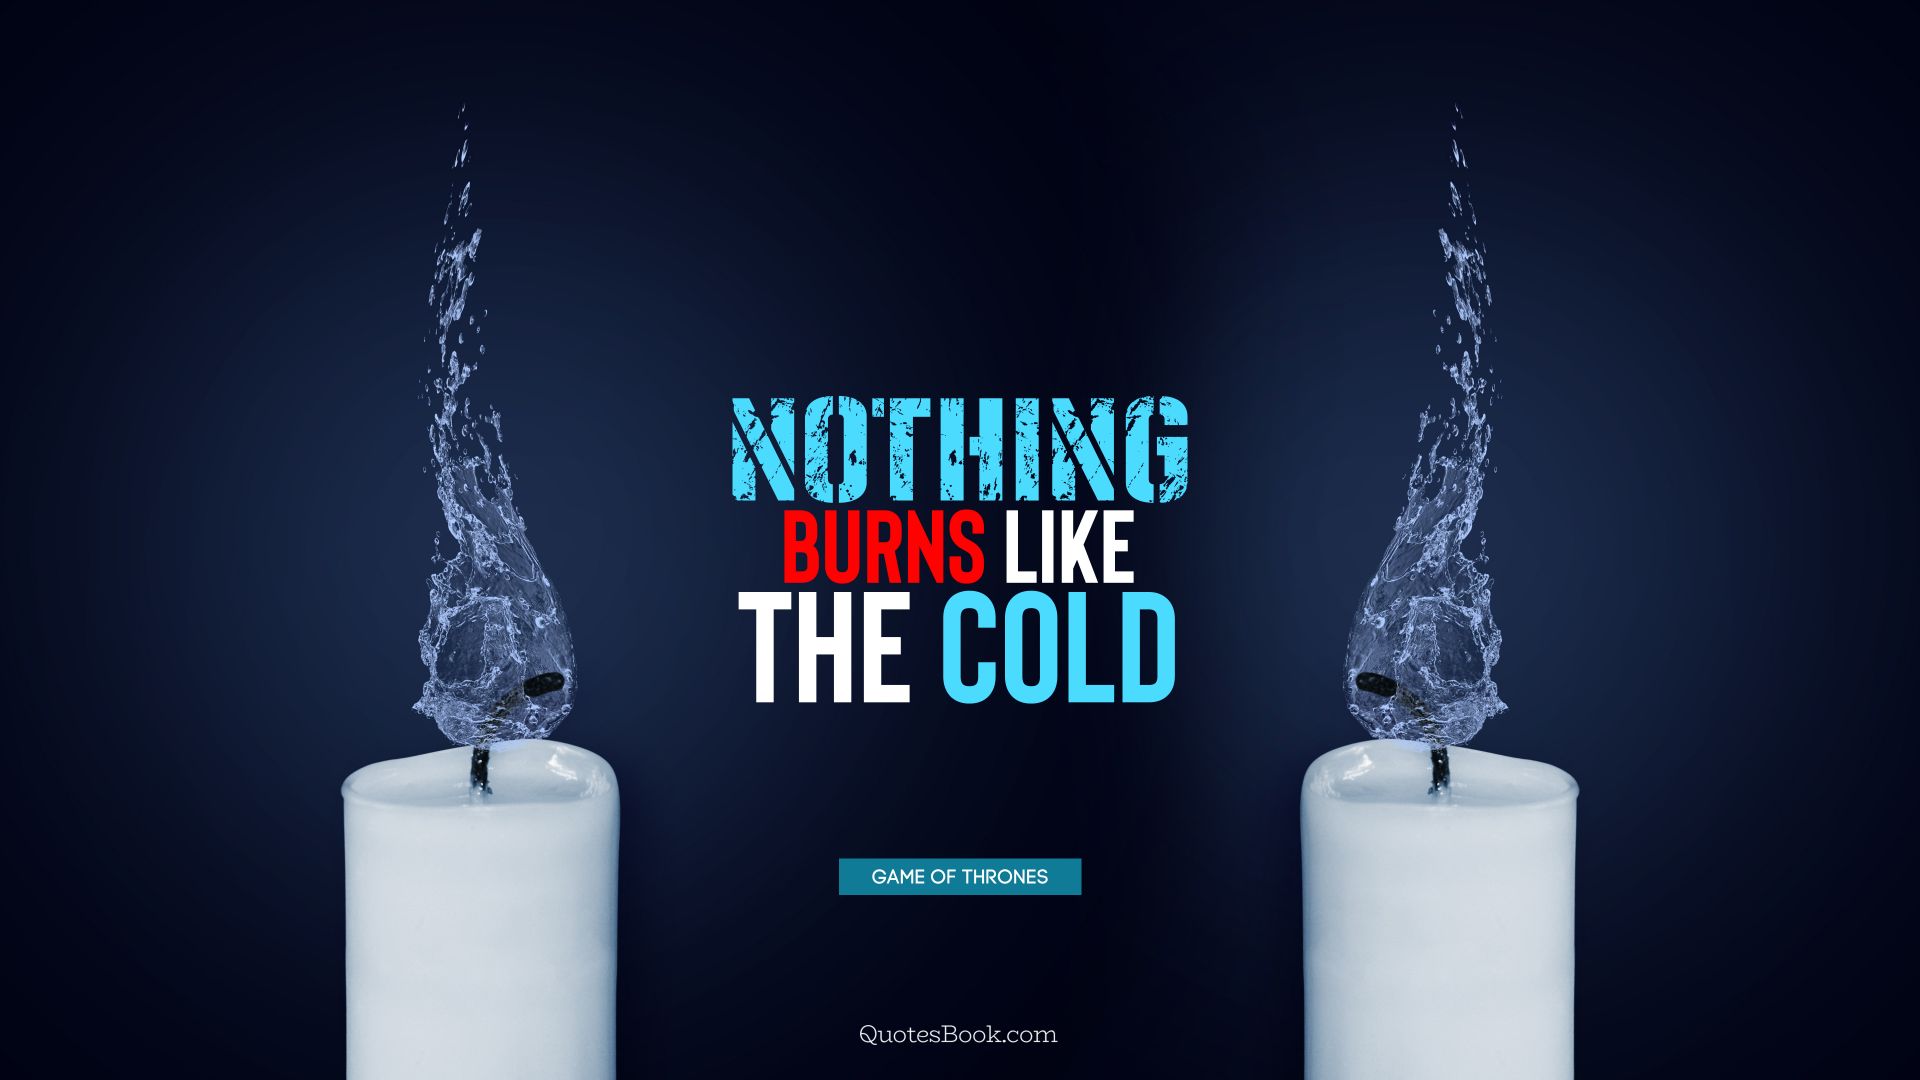 Nothing burns like the cold. - Quote by George R.R. Martin